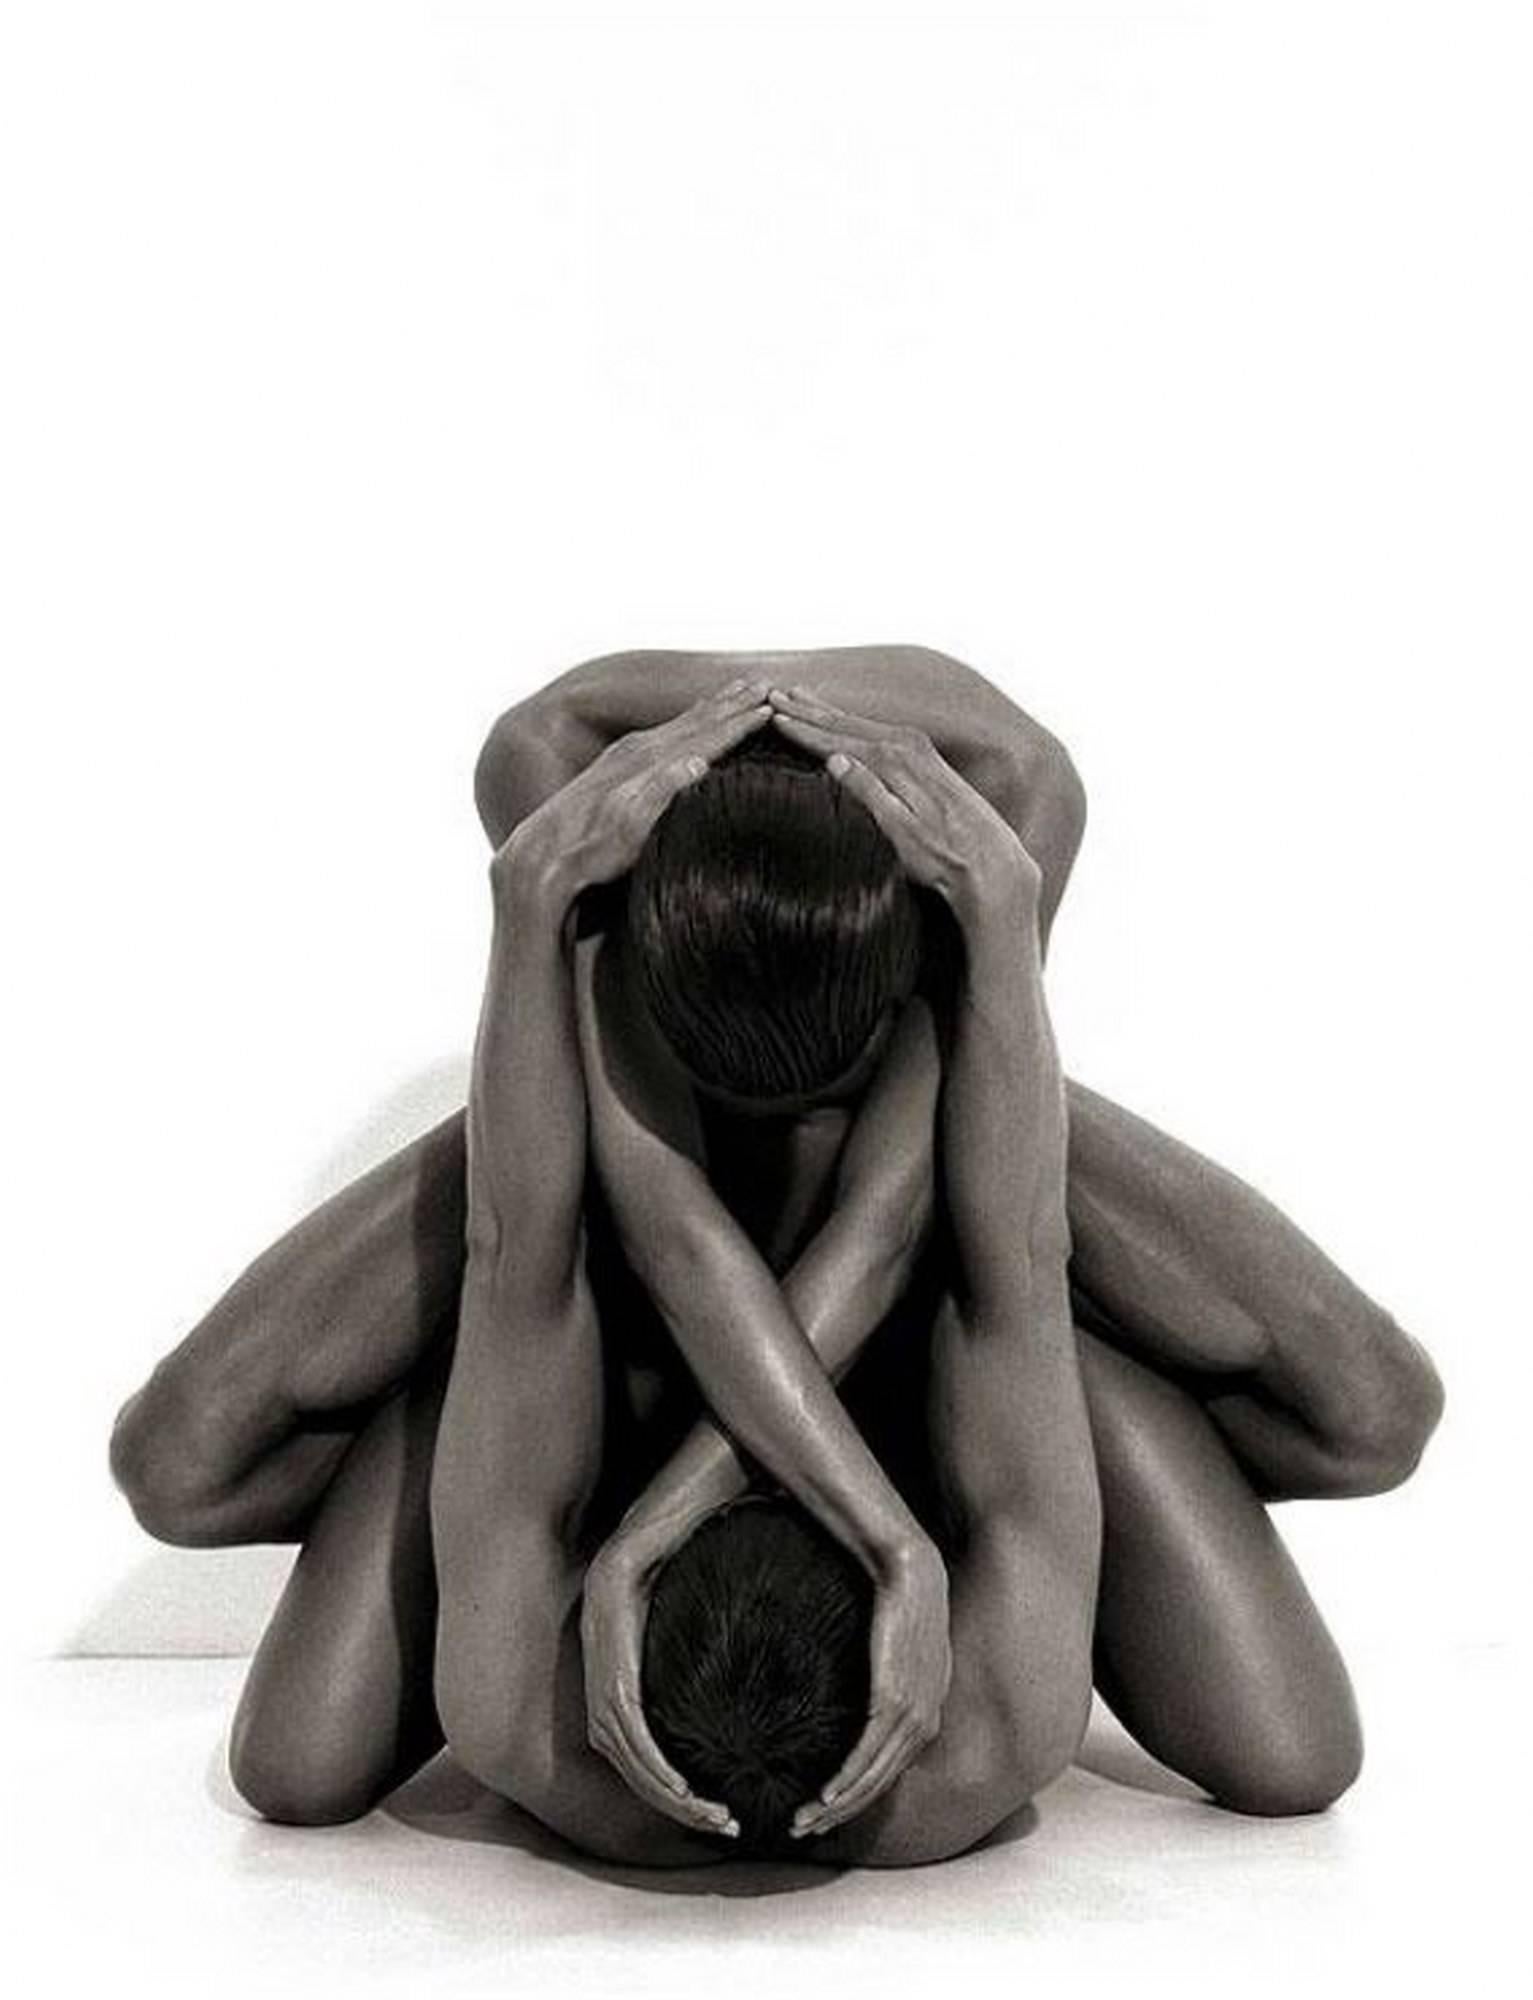 Andreas H. Bitesnich Figurative Photograph - Yvonne & Tom, nude photograph of man and woman intertwined in embrace